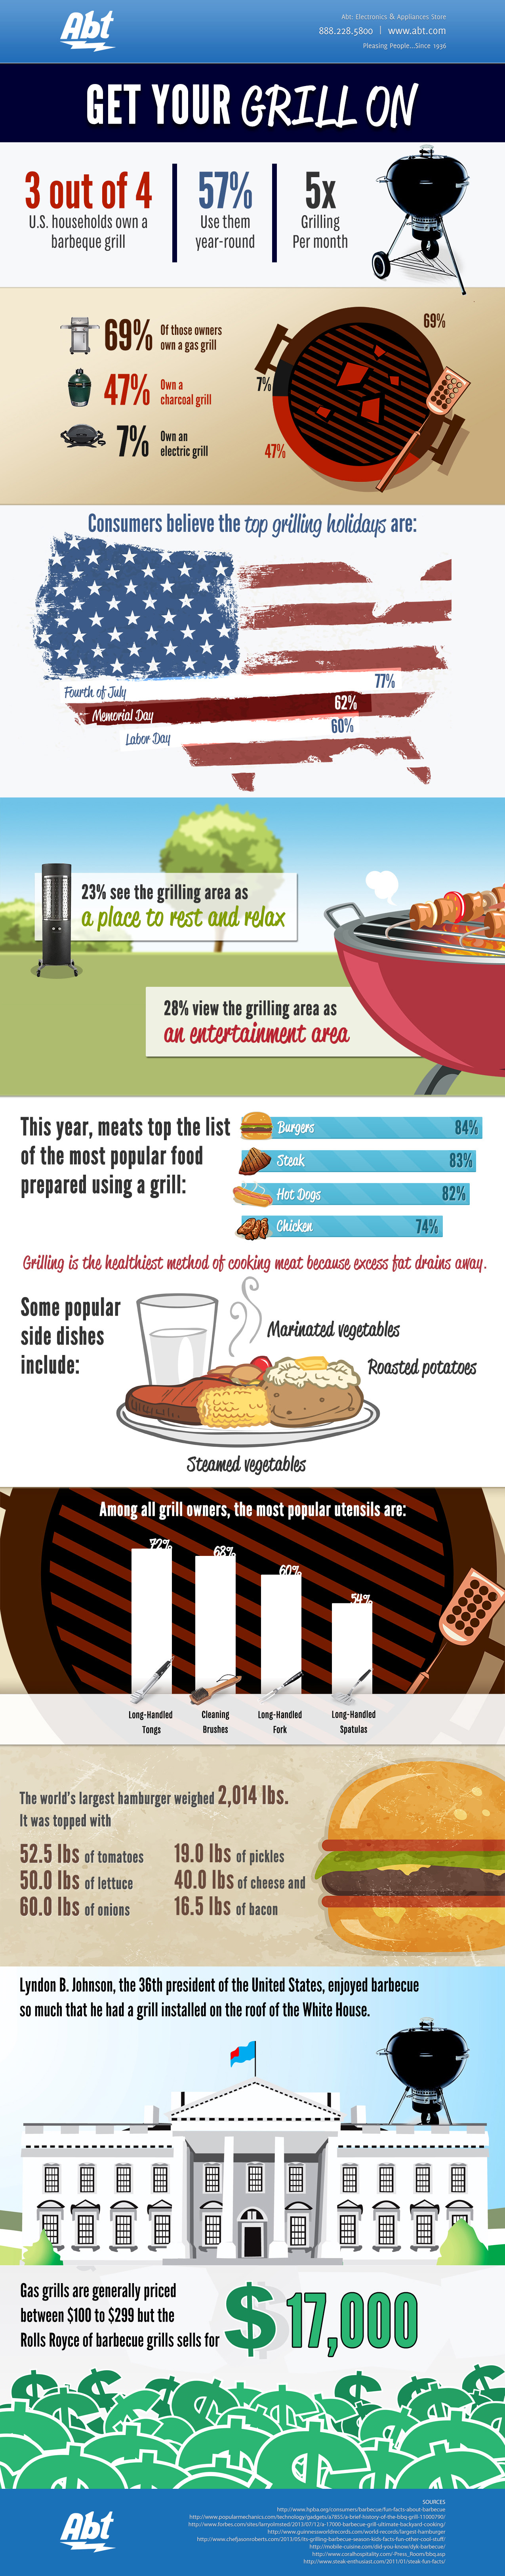 abt grilling infographic